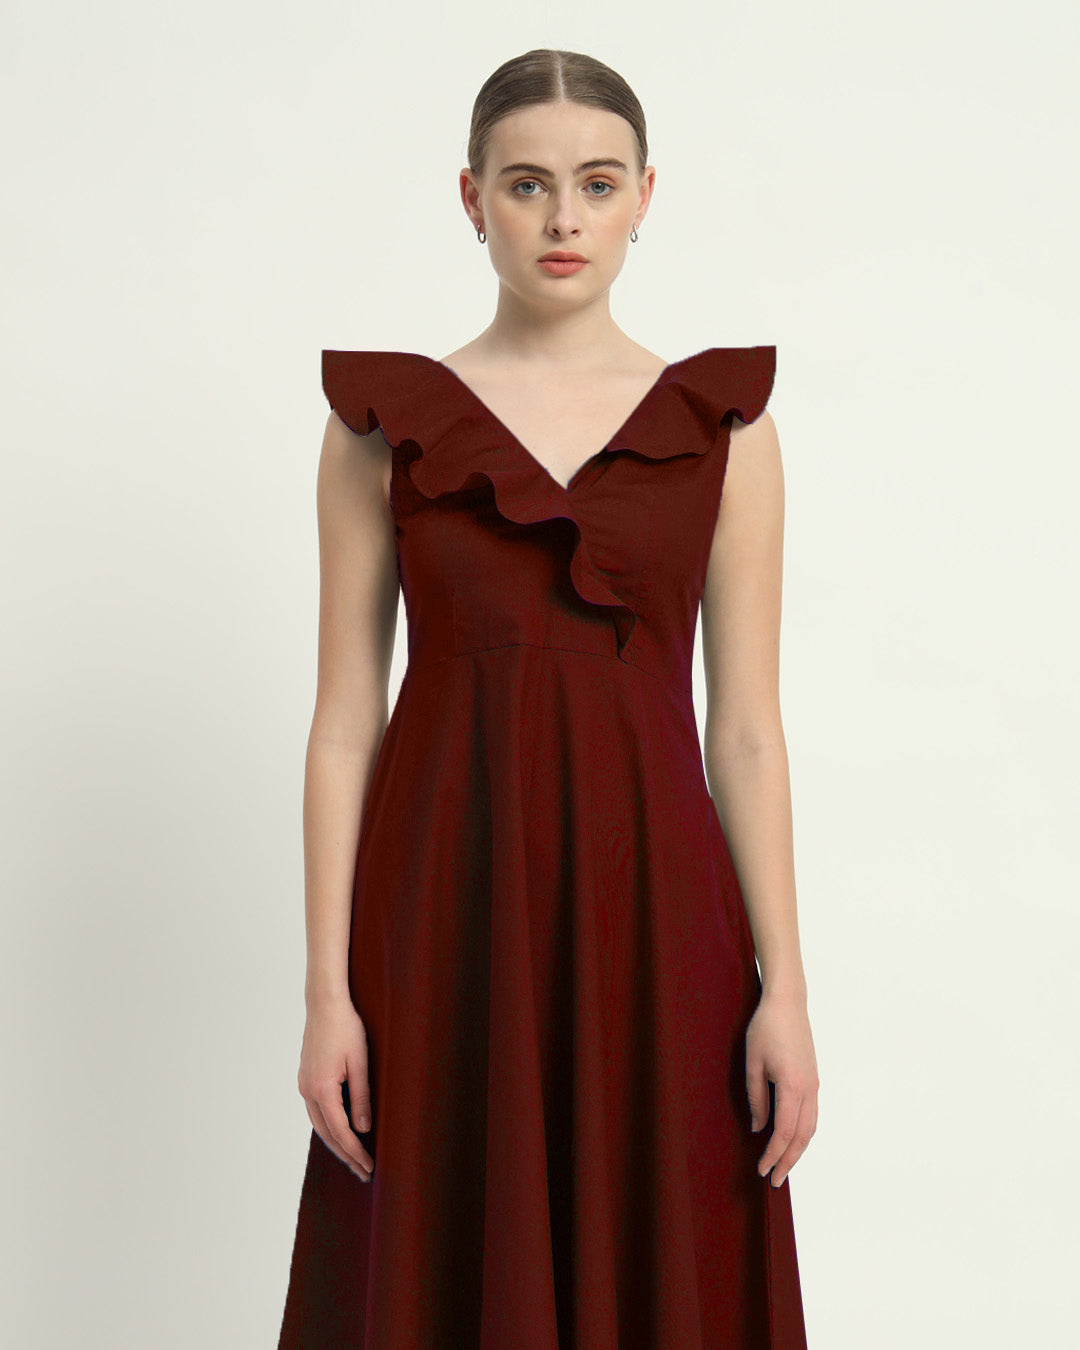 The Rouge Albany Cotton Dress